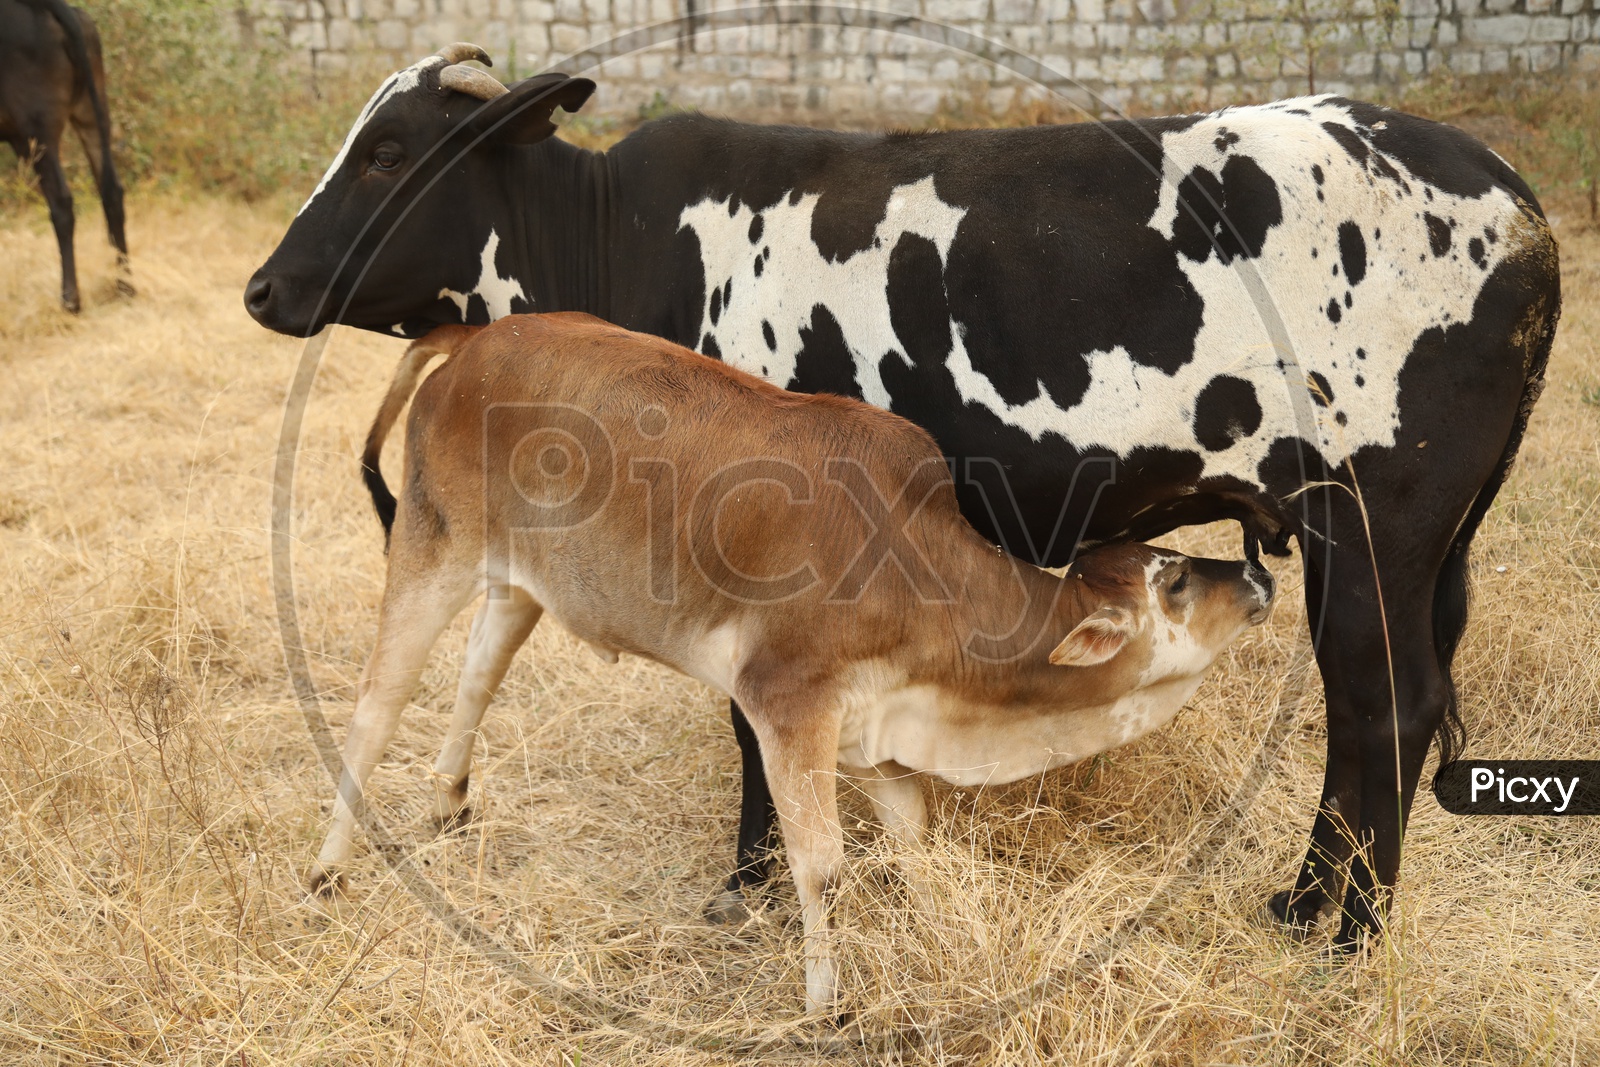 Calf having feed from mother cow